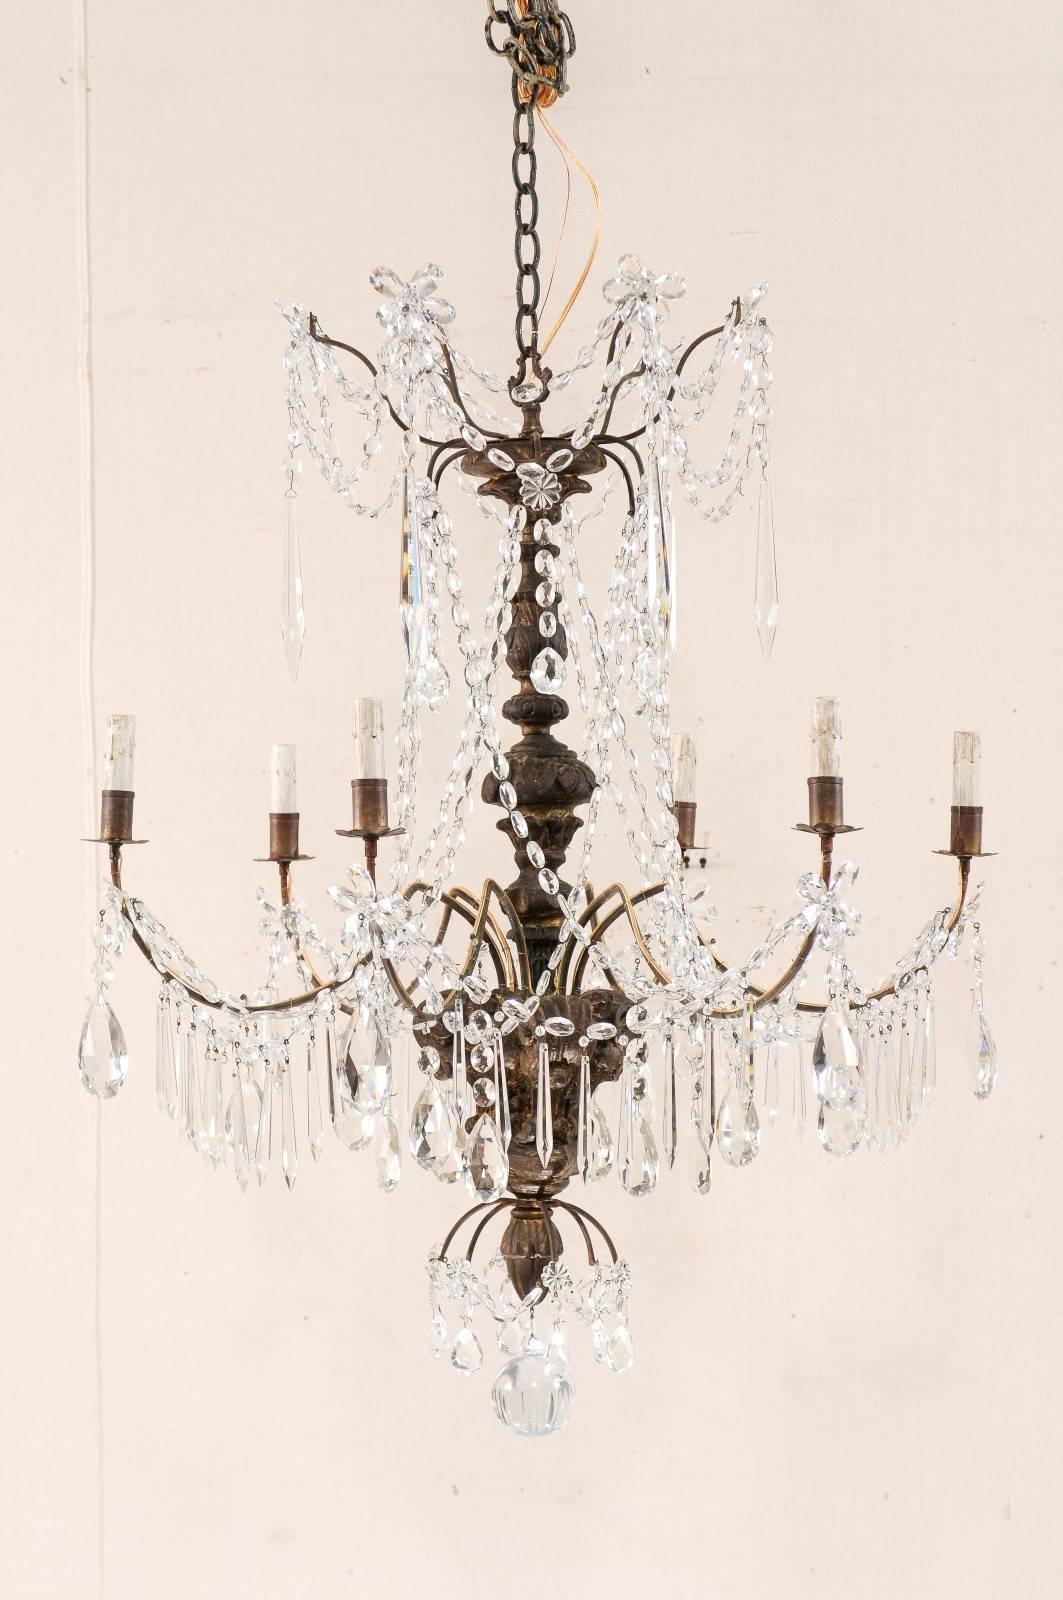 A pair of Italian early 20th century, six-light, crystal and wood chandeliers. This pair of antique Italian crystal chandeliers each features a decoratively carved central wood column, and a prominent splayed crystal waterfall top adorn with